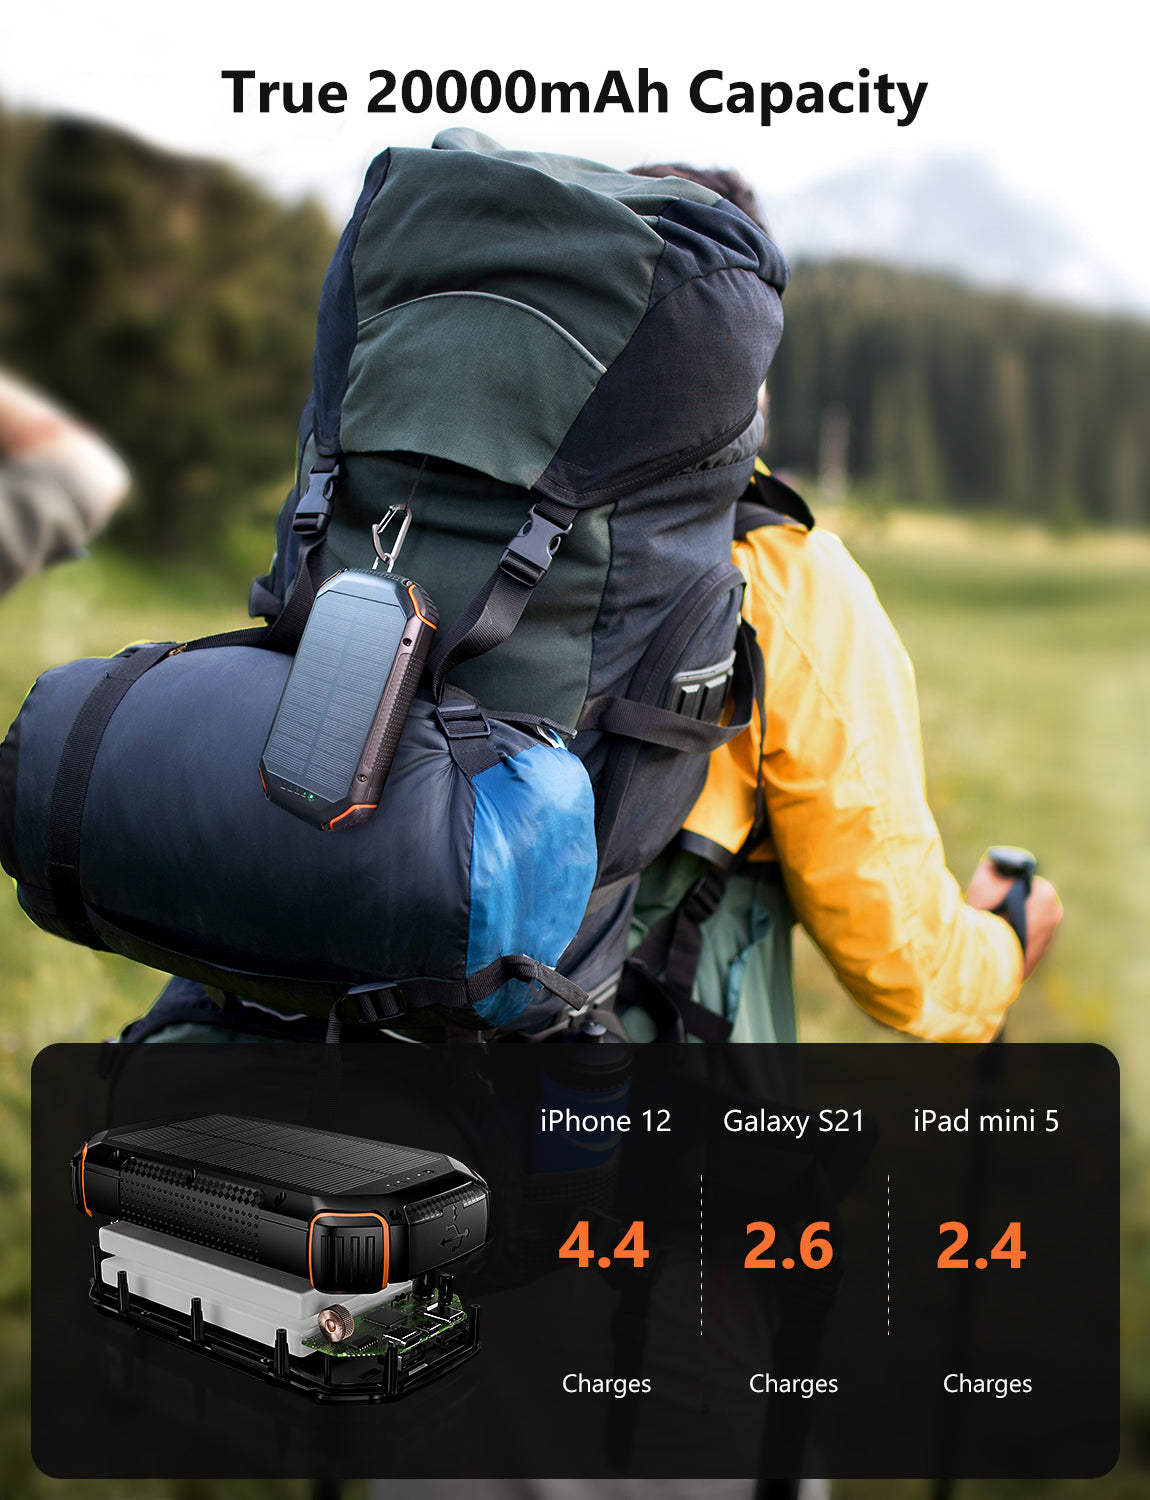 The 2000mAh power bank can be hung on a backpack and charge an iPhone 4.4 times, Galaxy 2.6 times.